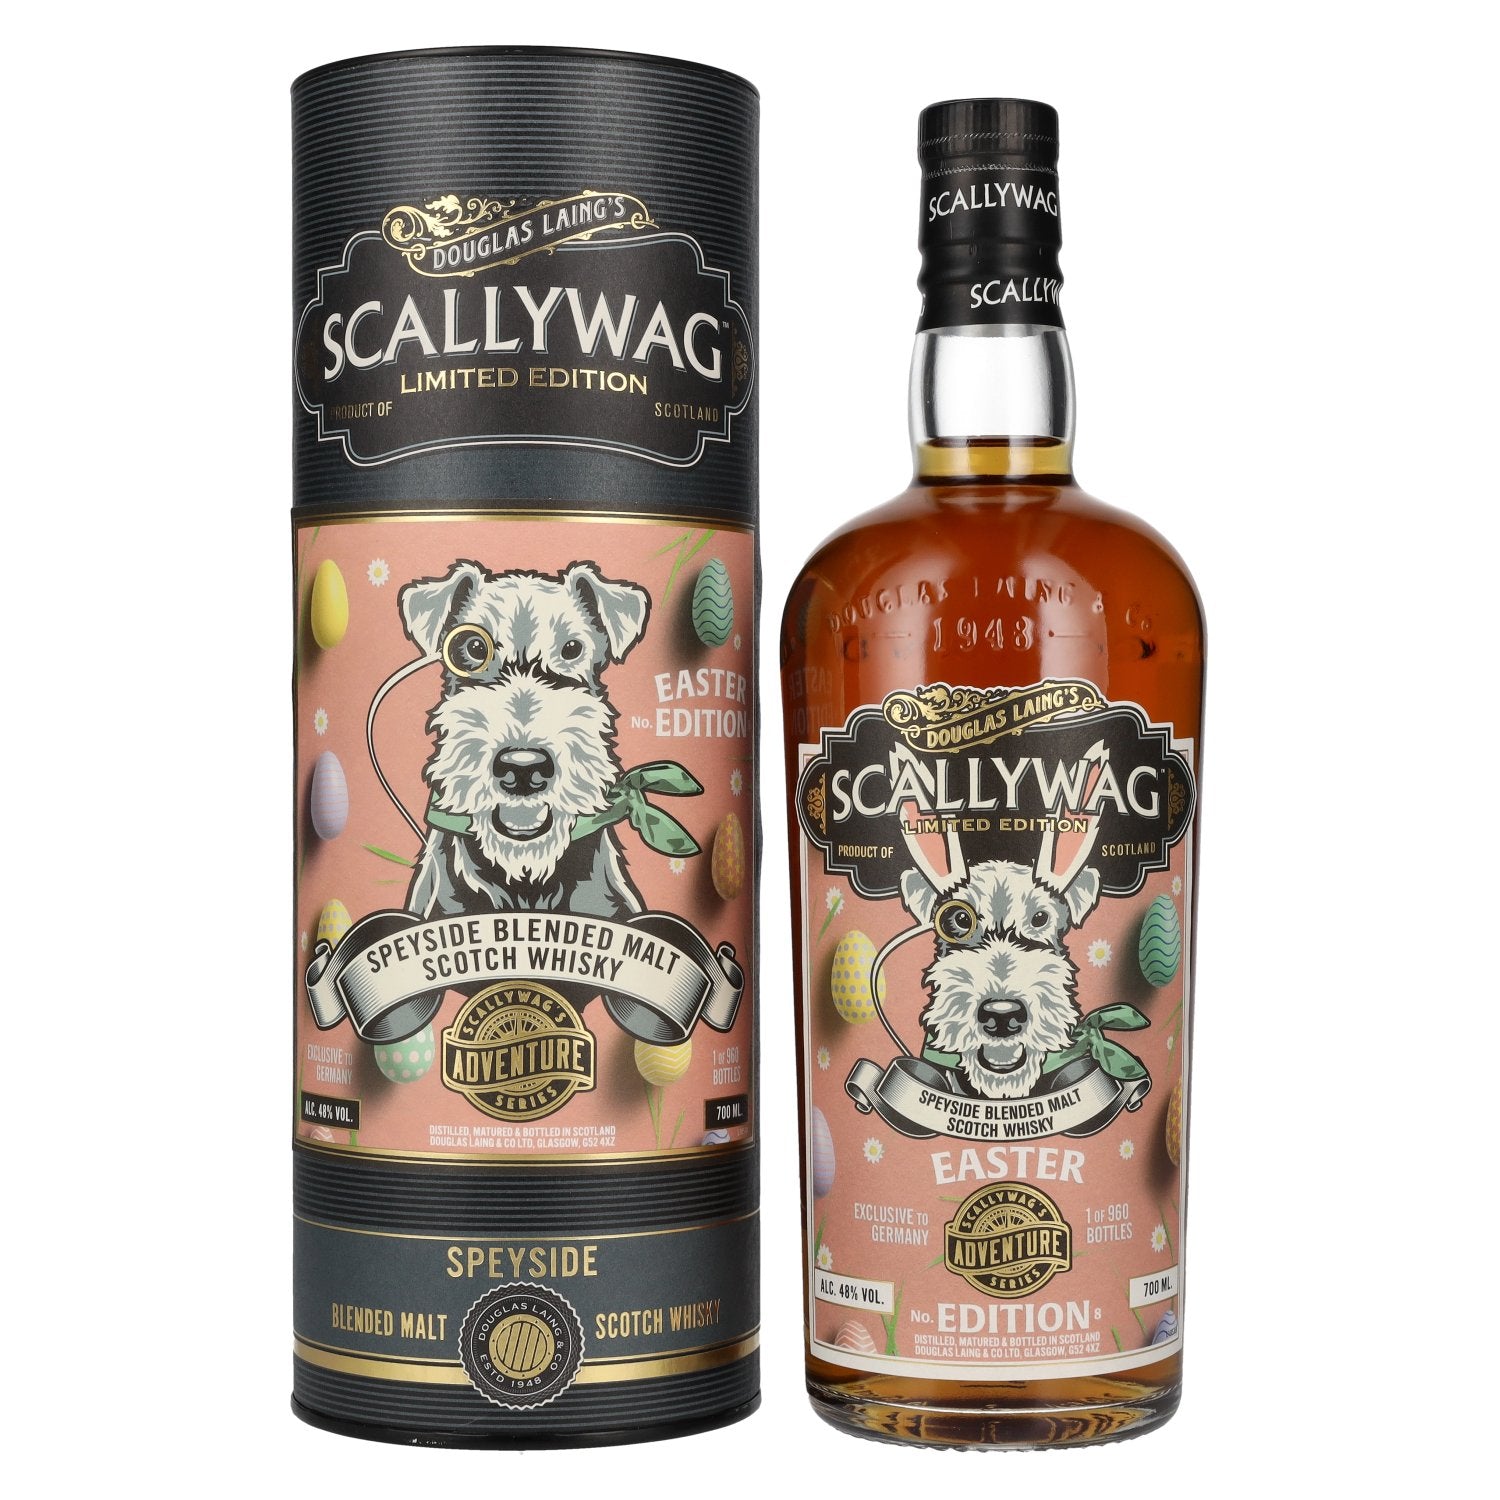 Douglas Laing SCALLYWAG The Easter Limited Edition No. 8 48% Vol. 0,7l in Giftbox